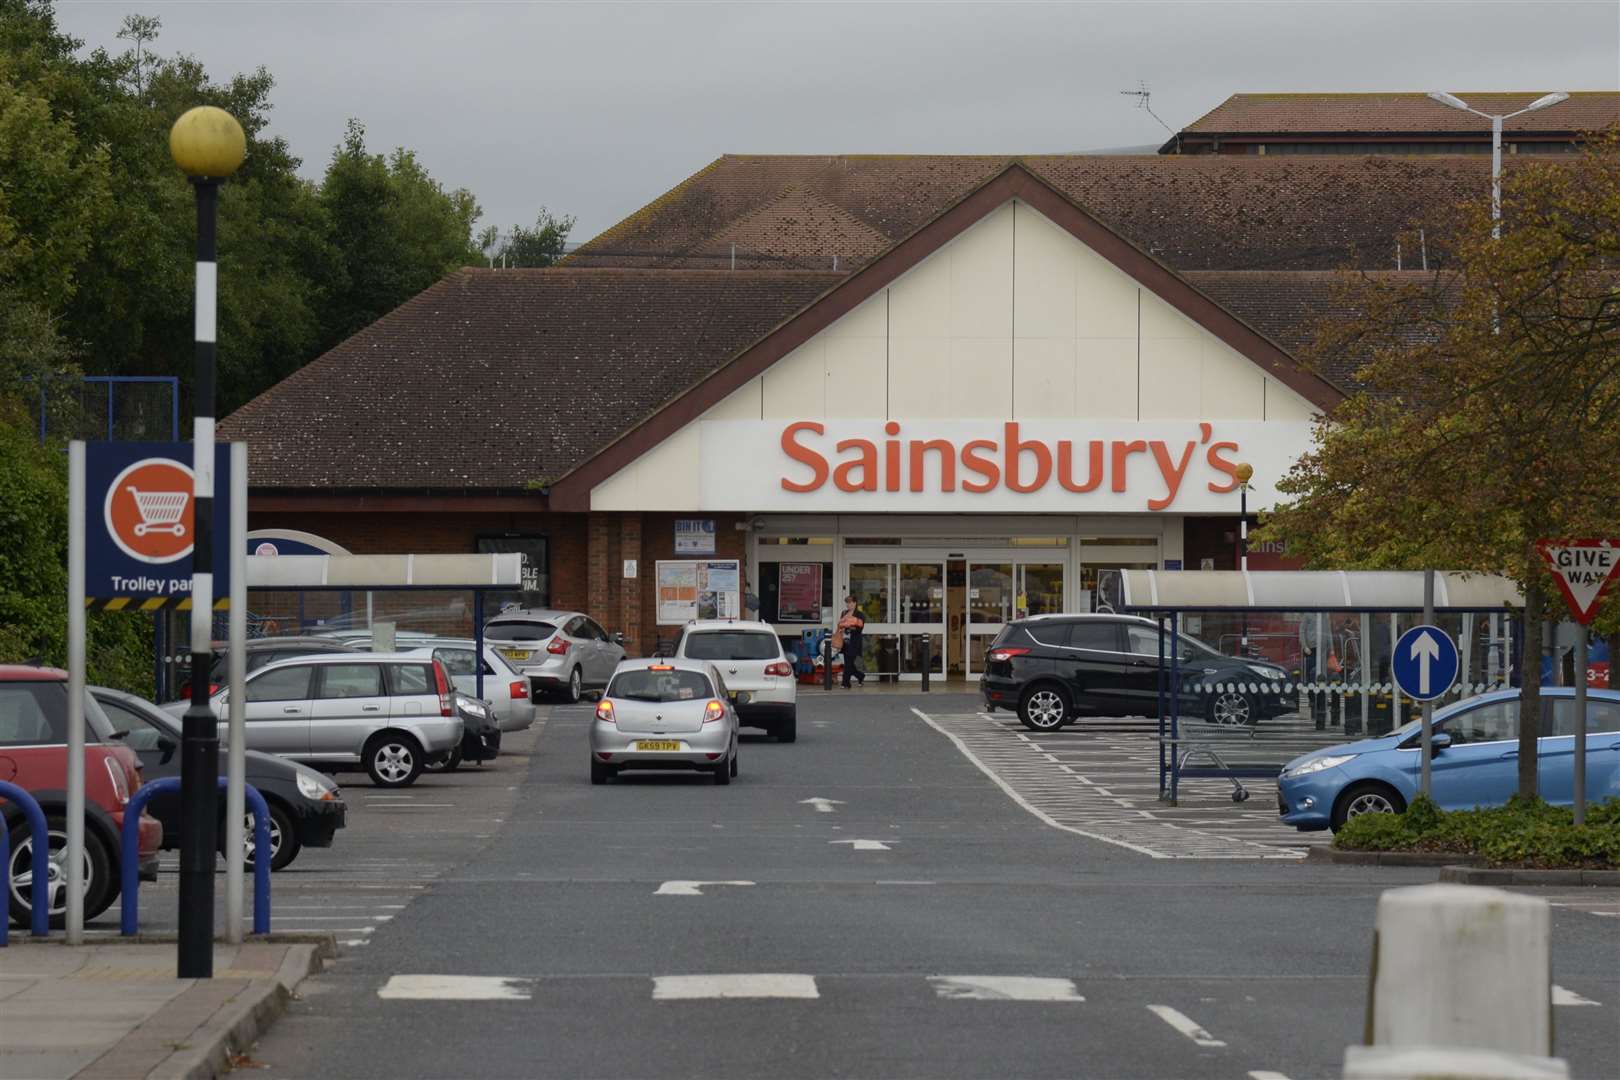 Starbucks will be opening a new branch at the Sainsbury's supermarket in Chestfield, near Whitstable. Picture: Chris Davey